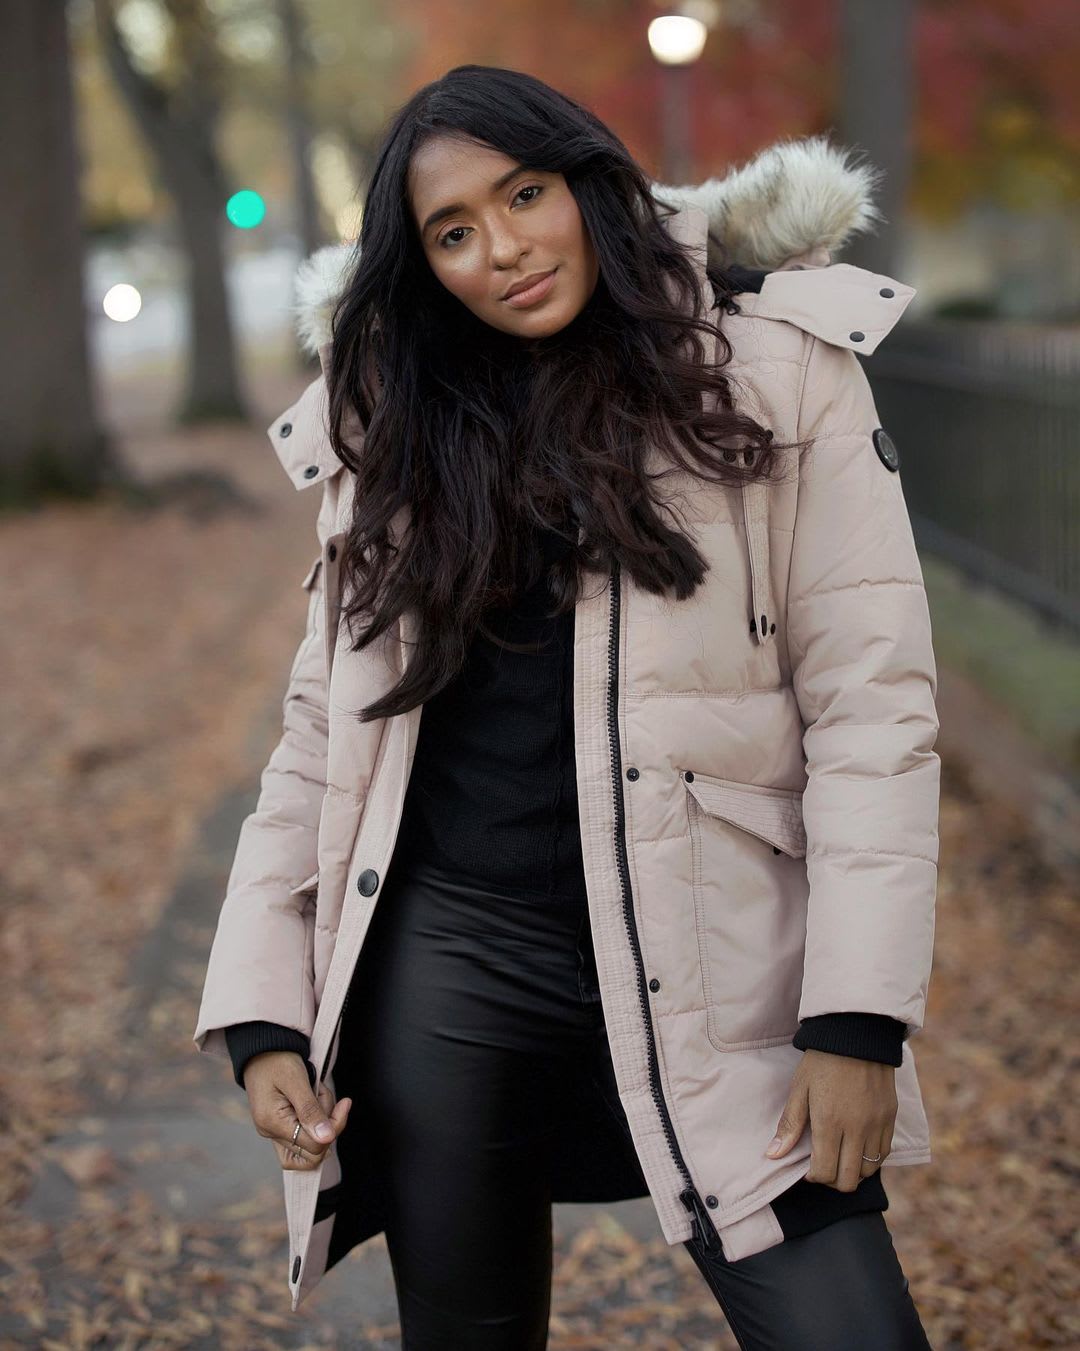 The Best Puffer Jackets For Staying Warm In Style - Lulus.com Fashion Blog